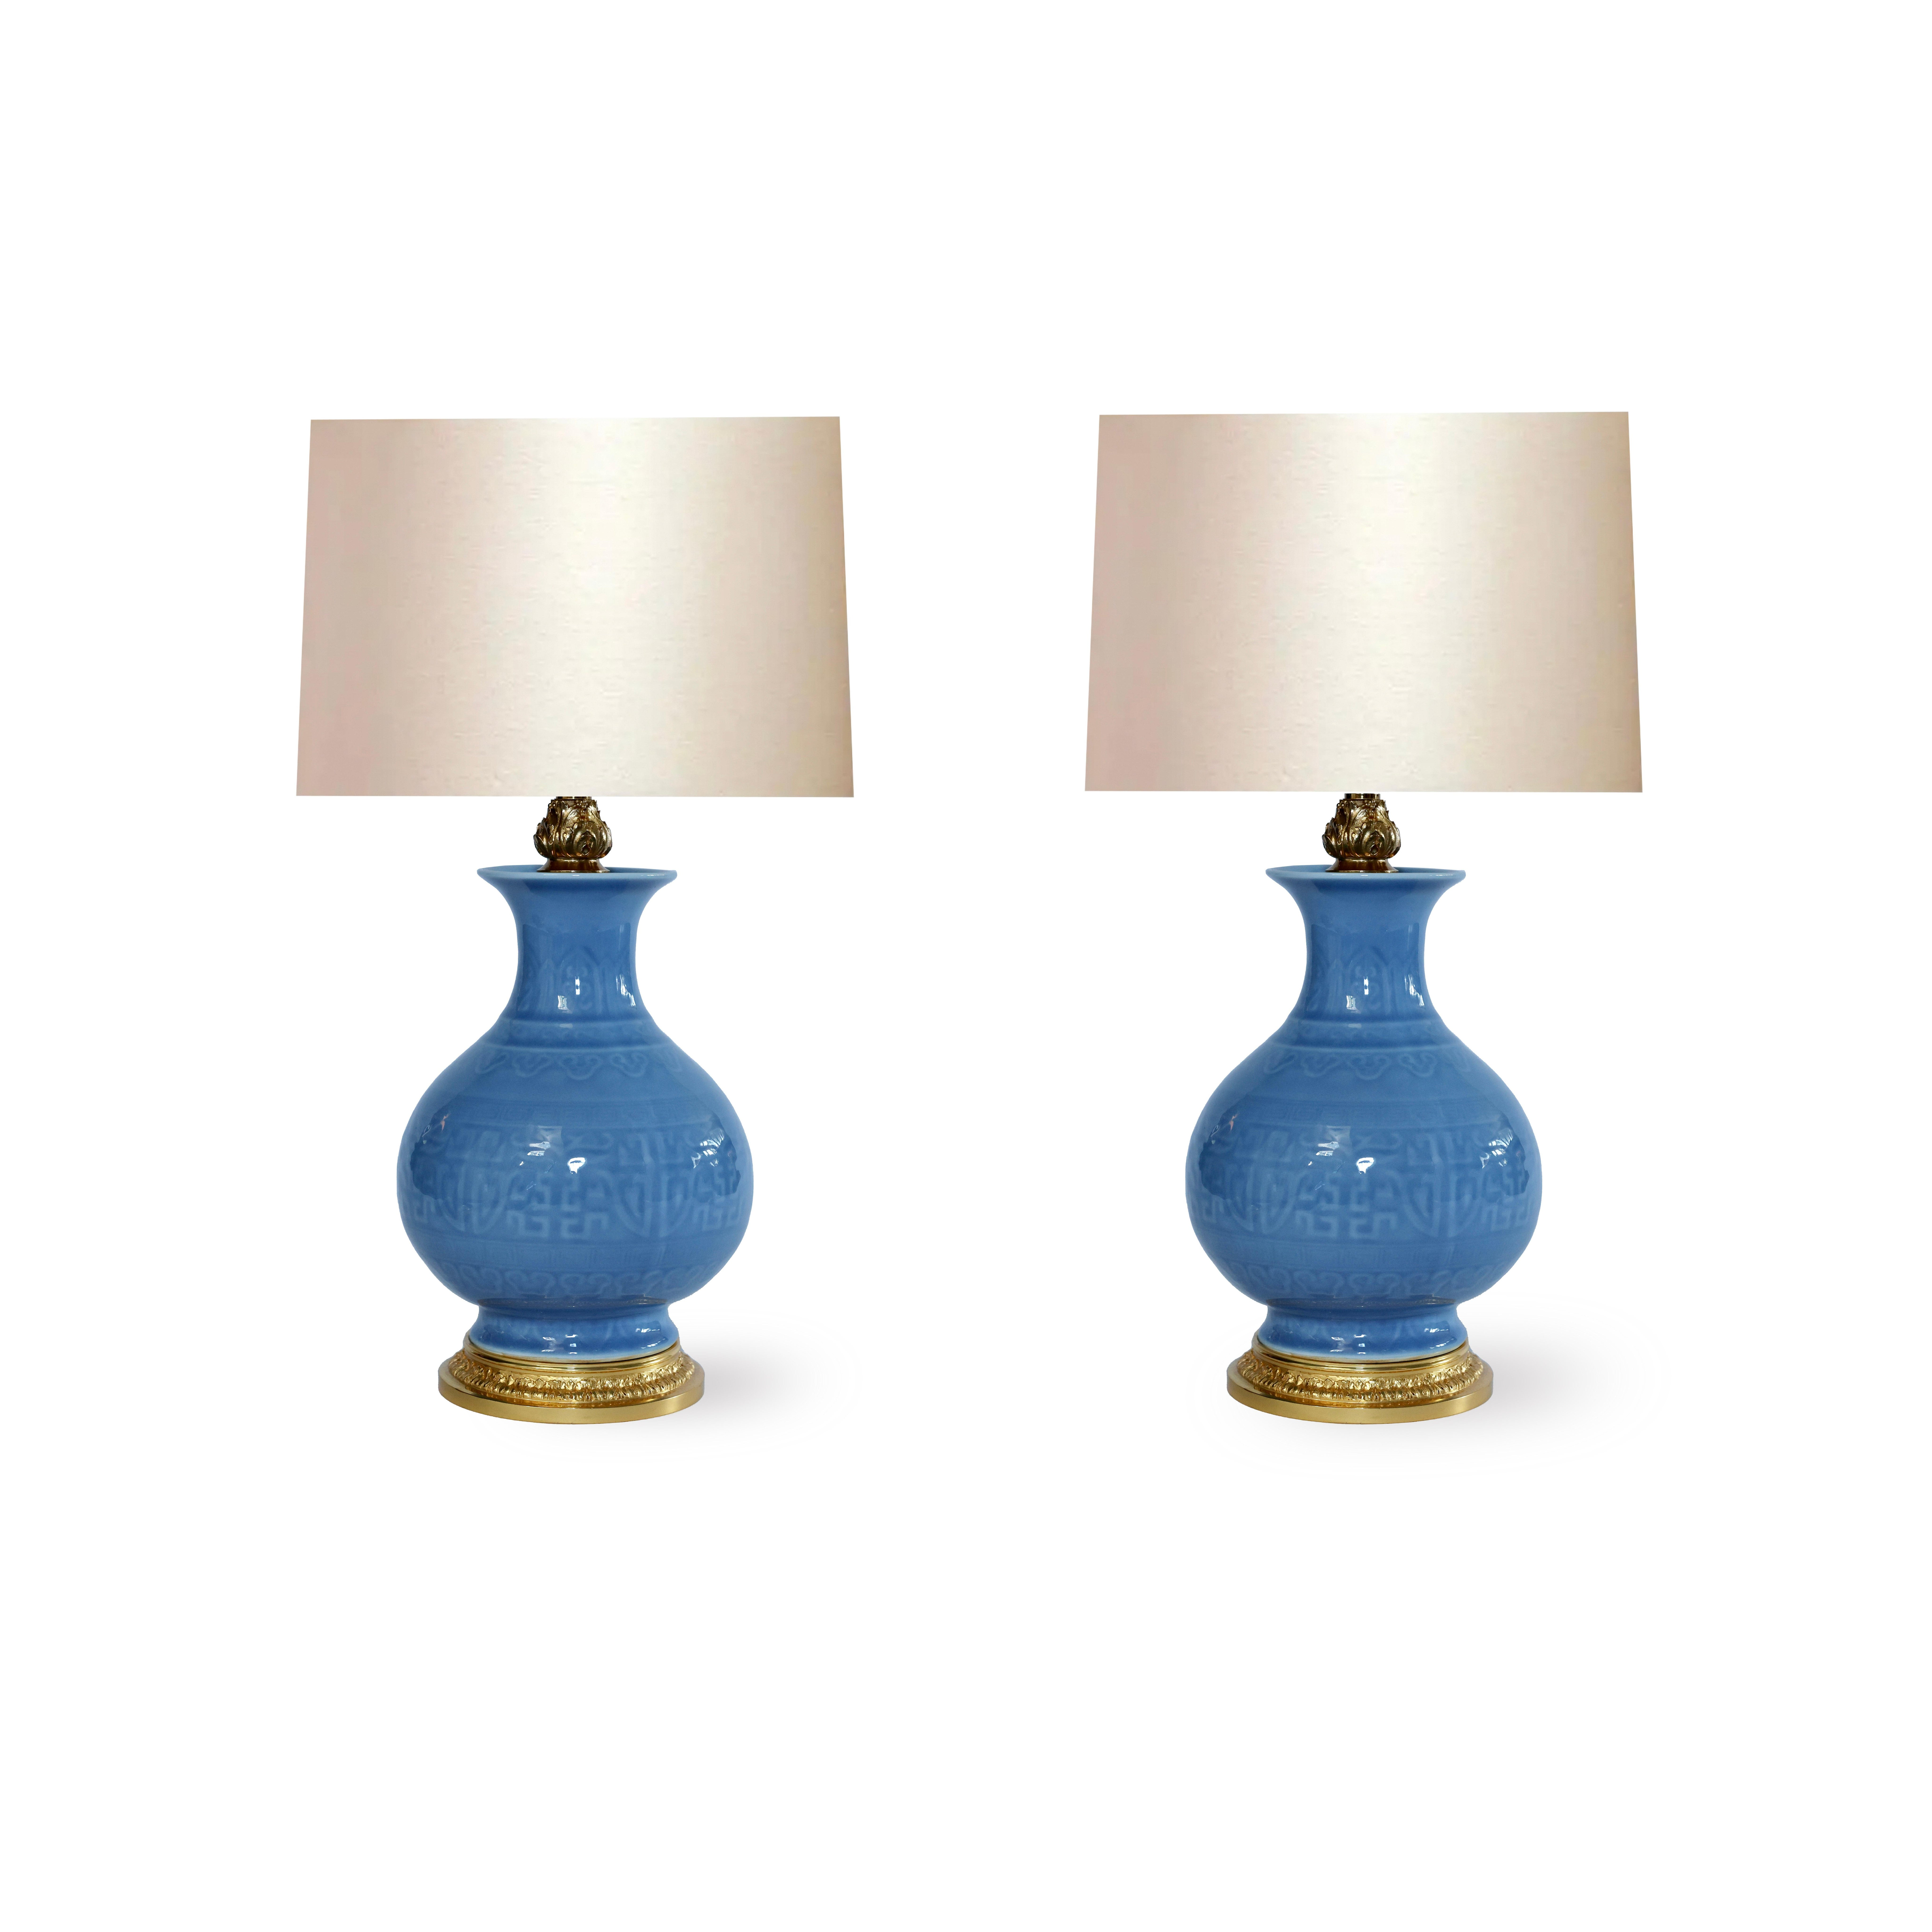 Pair of Clair de lune porcelain lamps with gilt bases.
Lamp shades are not included
To the top of the vase 10.5 inch
